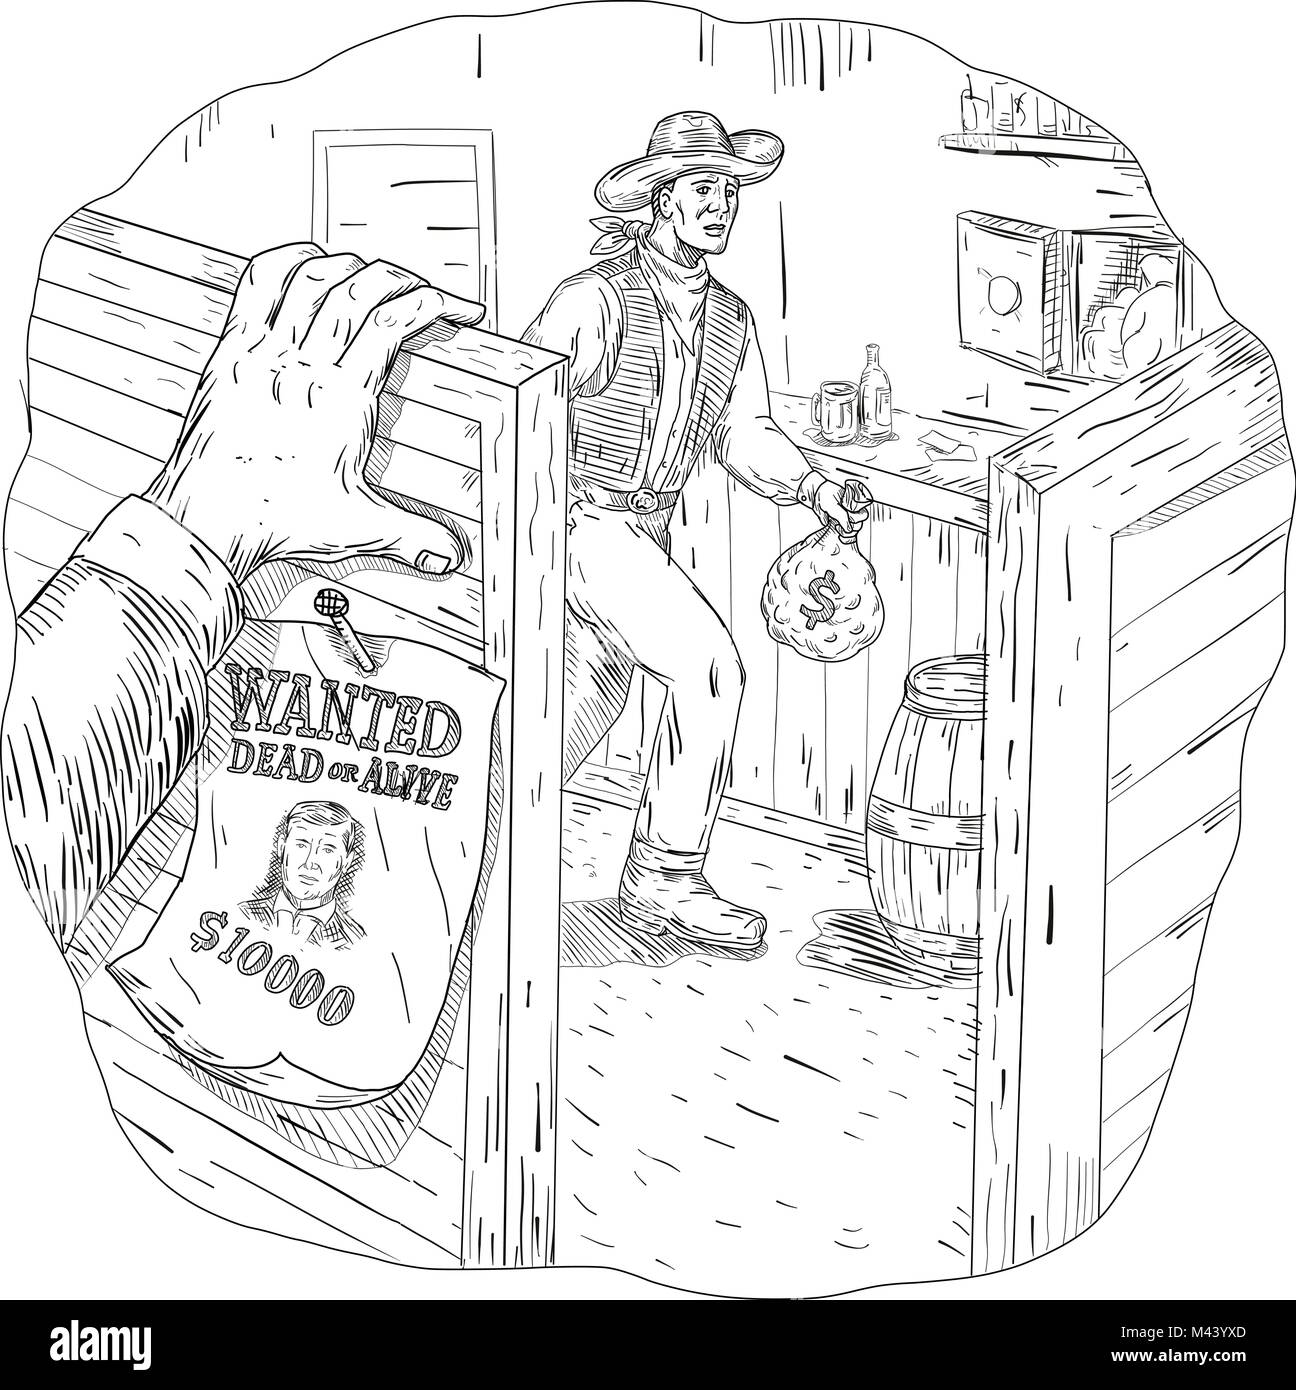 Drawing sketch style illustration of a cowboy robber, bandit or outlaw robbing a saloon with wanted sign and hand on swing door done in black and whit Stock Vector